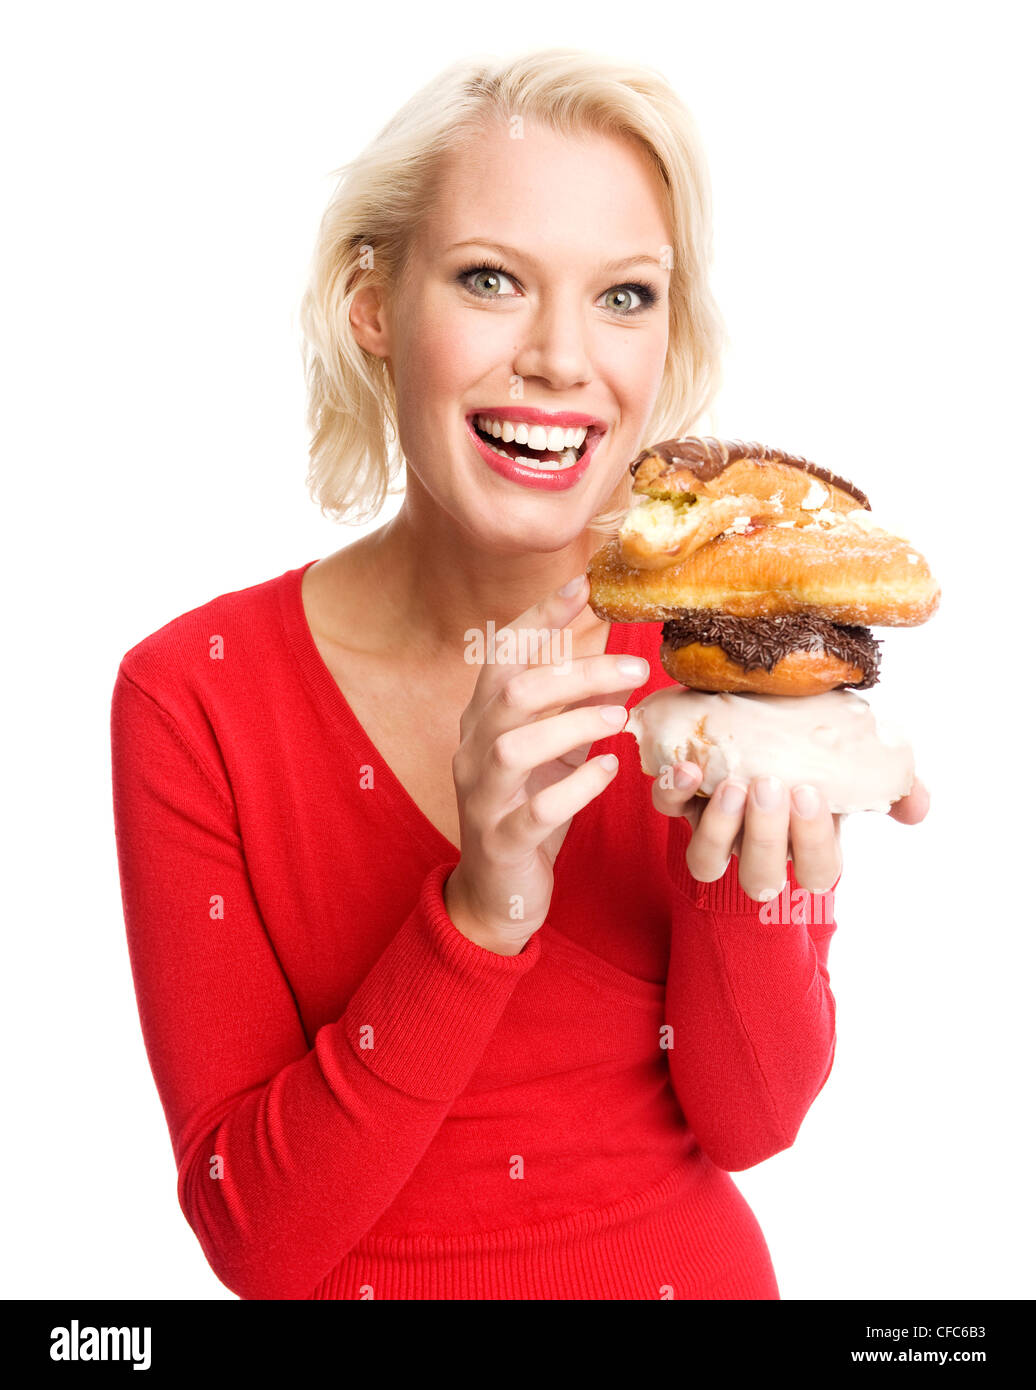 Female holding an iced bun, a chocolate donut, a sugared donut and a chocolate eclair piled up Stock Photo